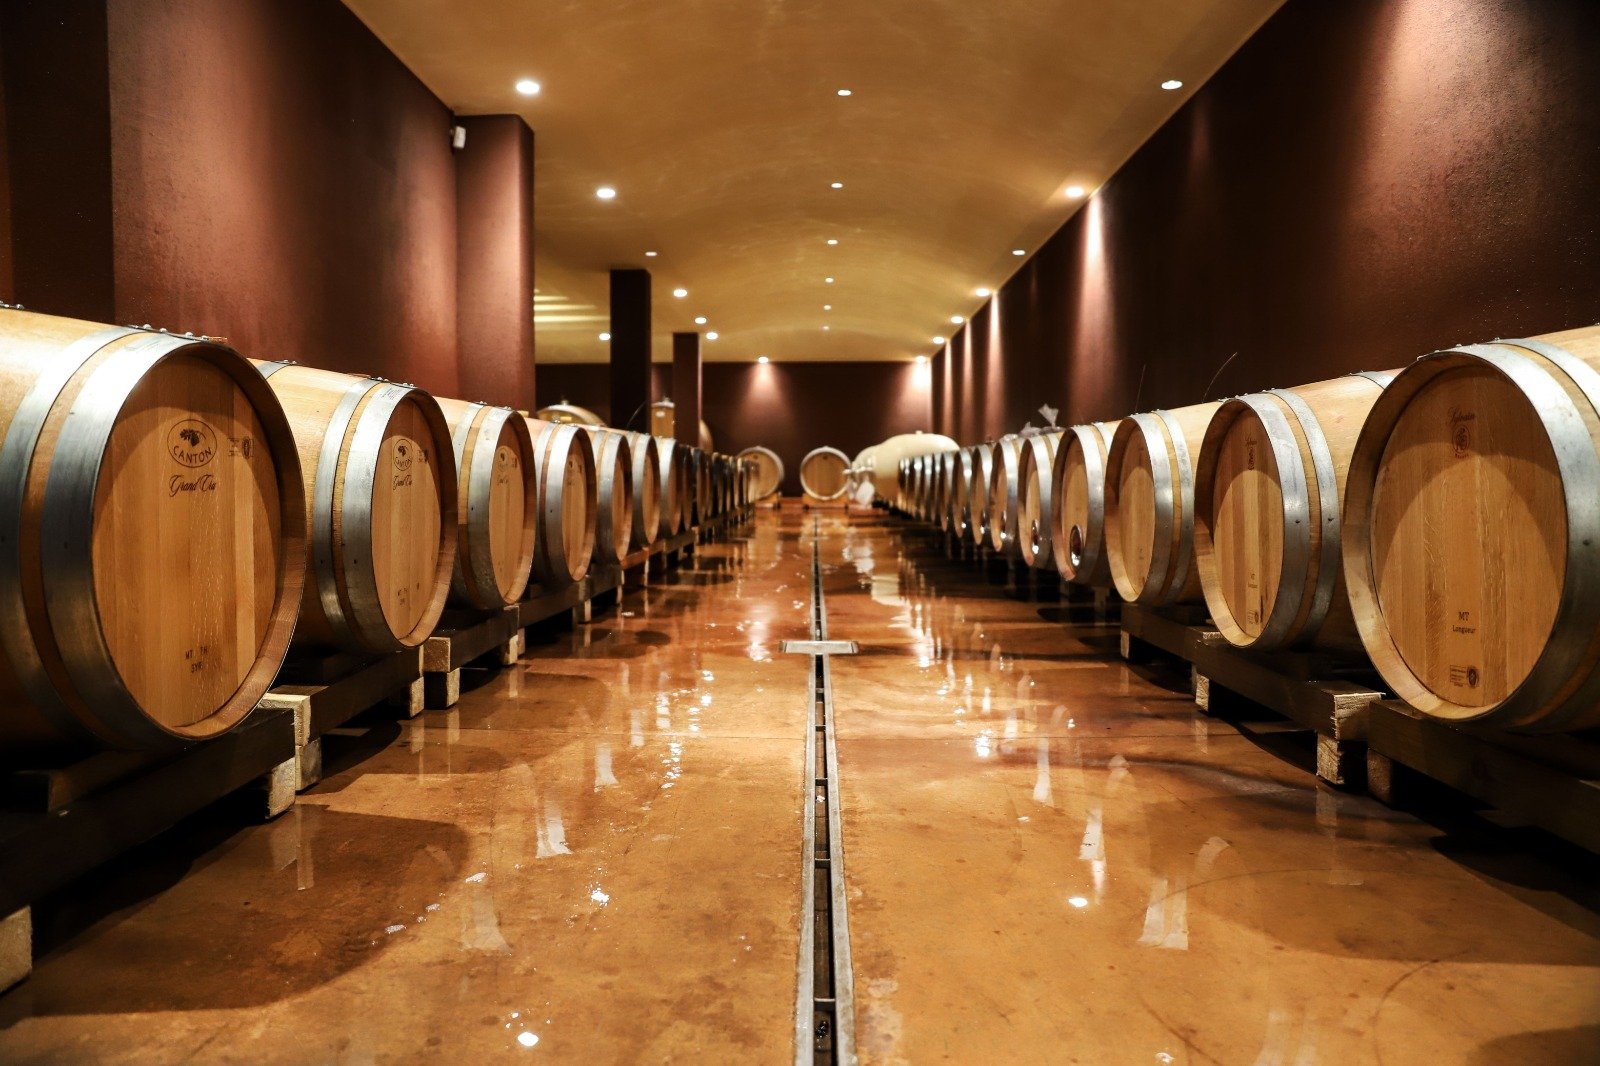 Enjoy A Guided Tour Of The Wine Cellars During The Wine Tasting Experience In Bardolino (lake Garda)_52